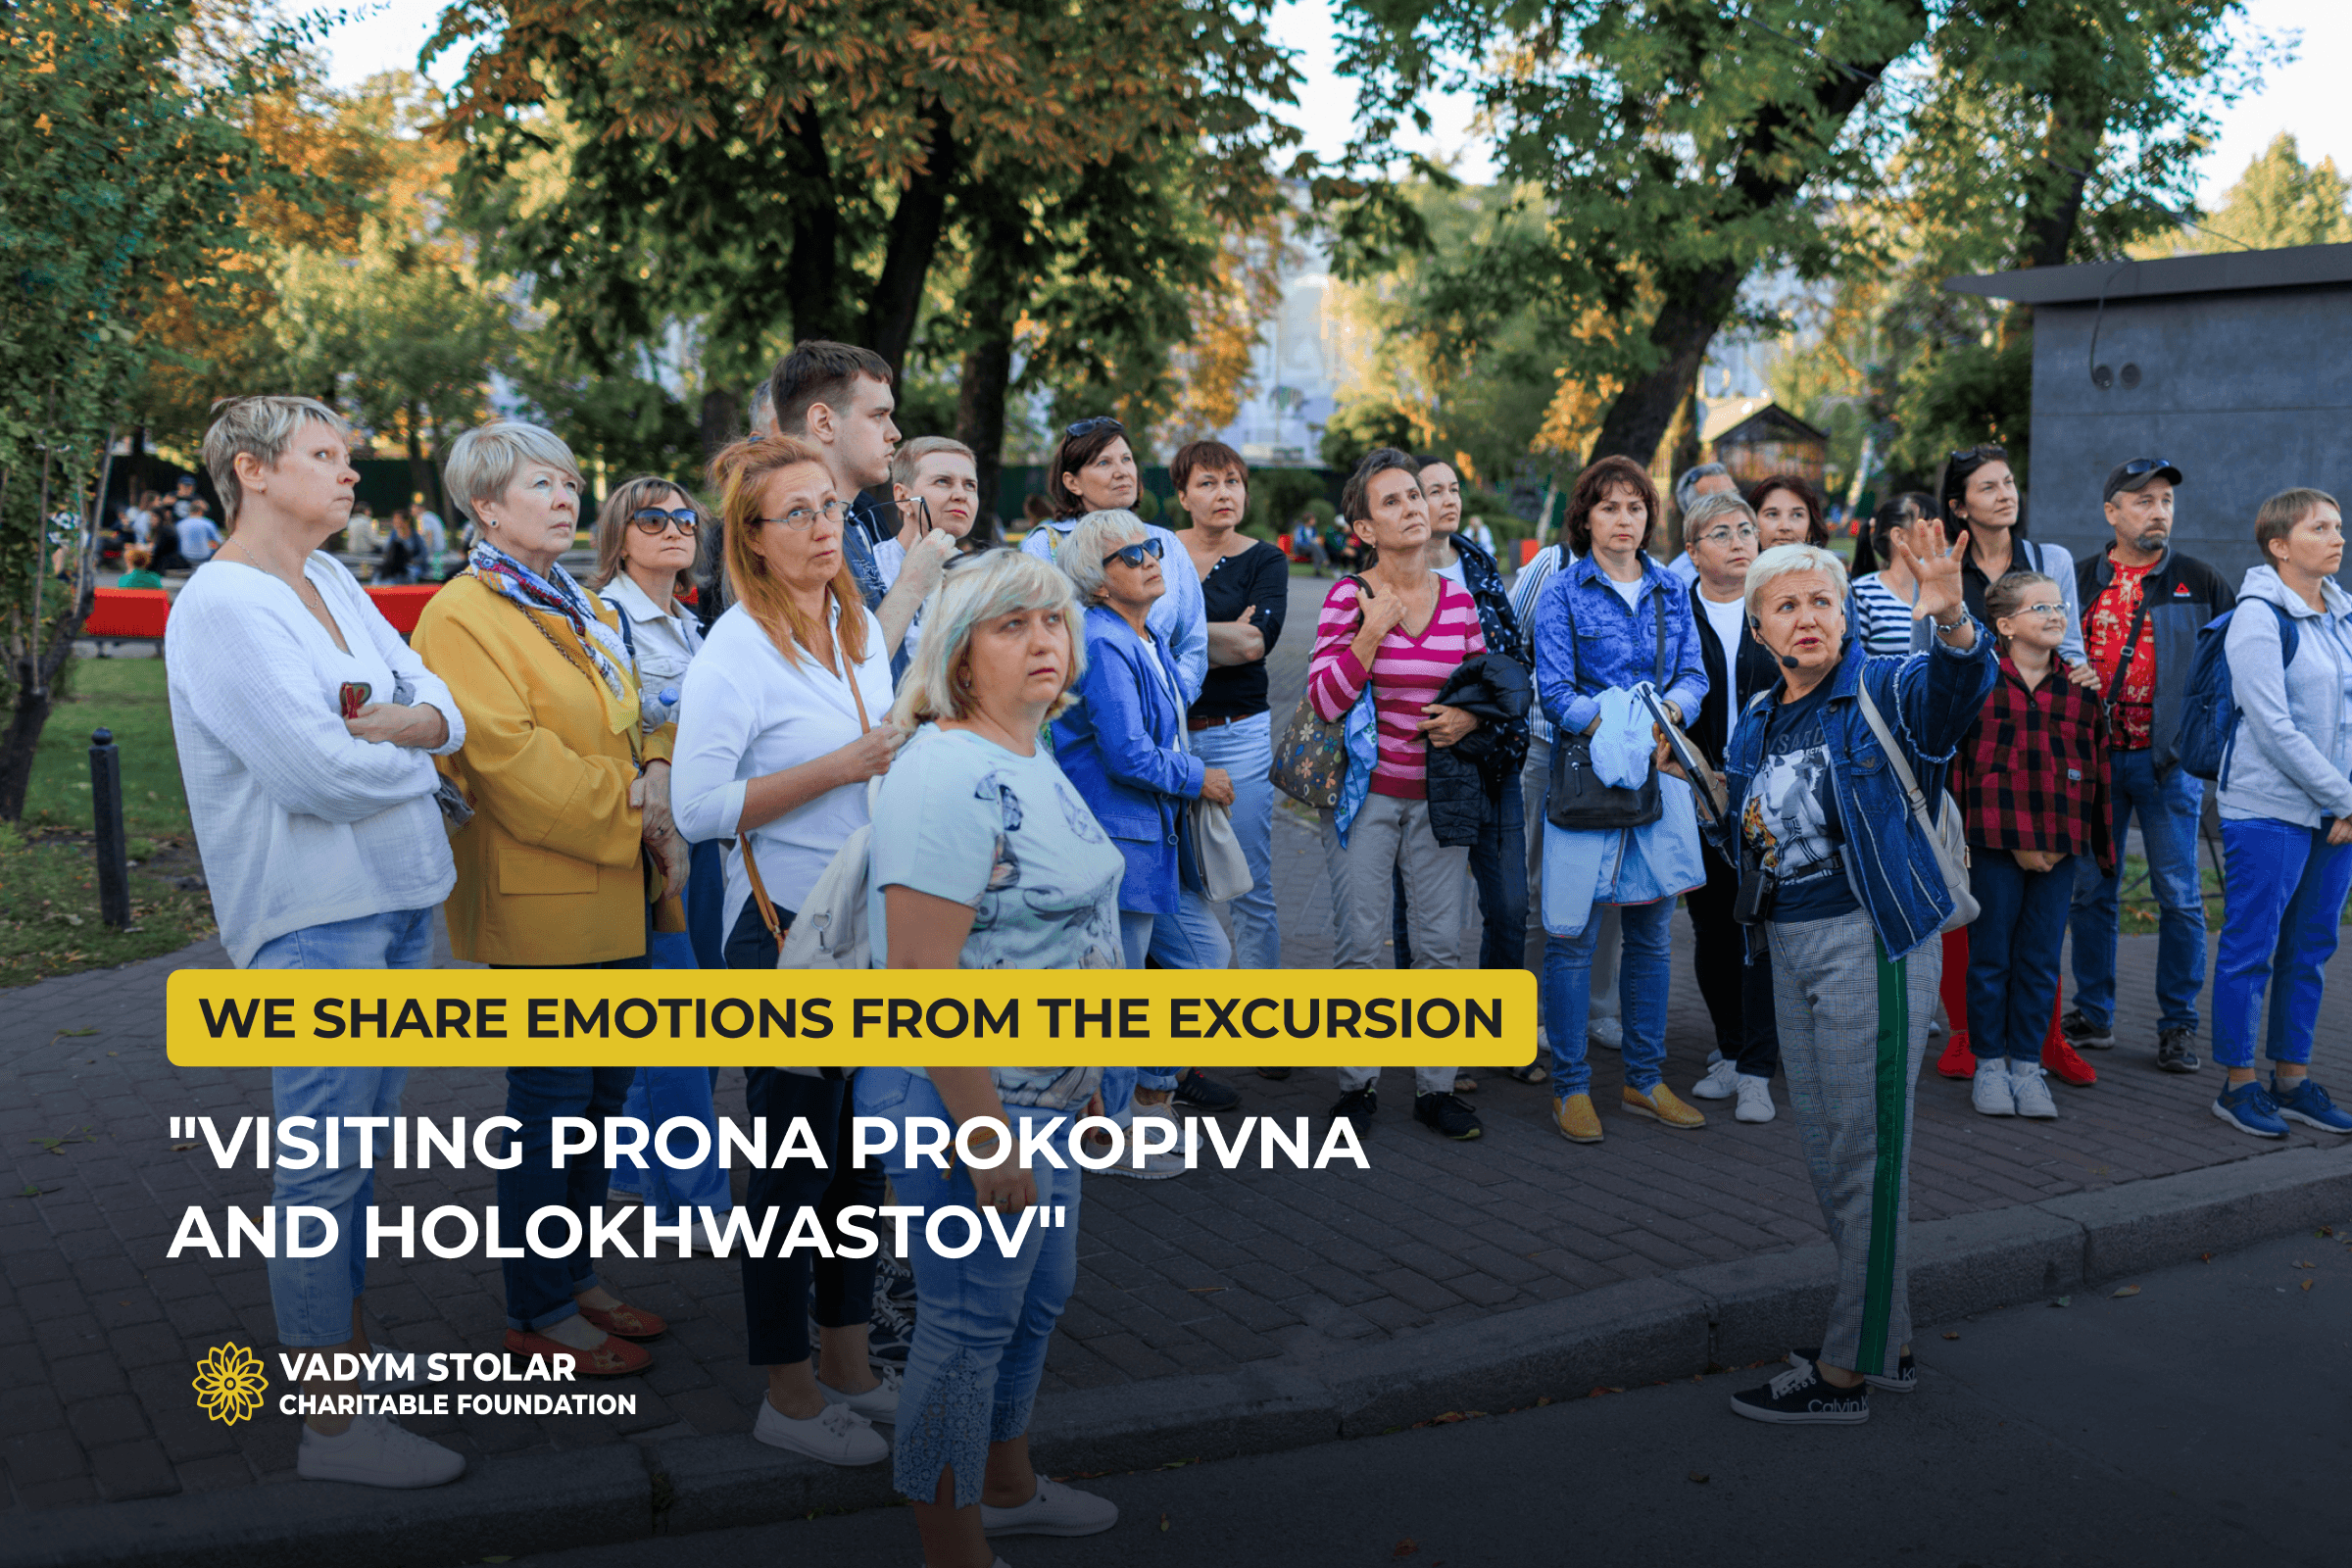 We share emotions from the excursion "Visiting Prona Prokopivna and Holokhwastov"